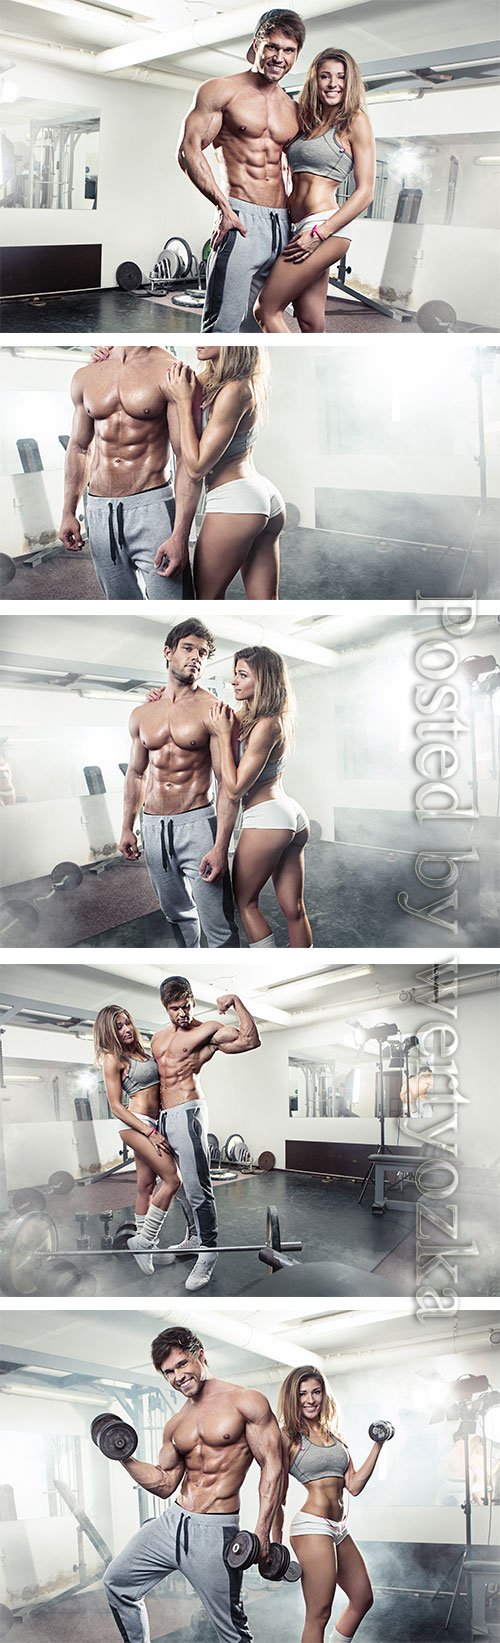 Young athletic man and girl in gym stock photo